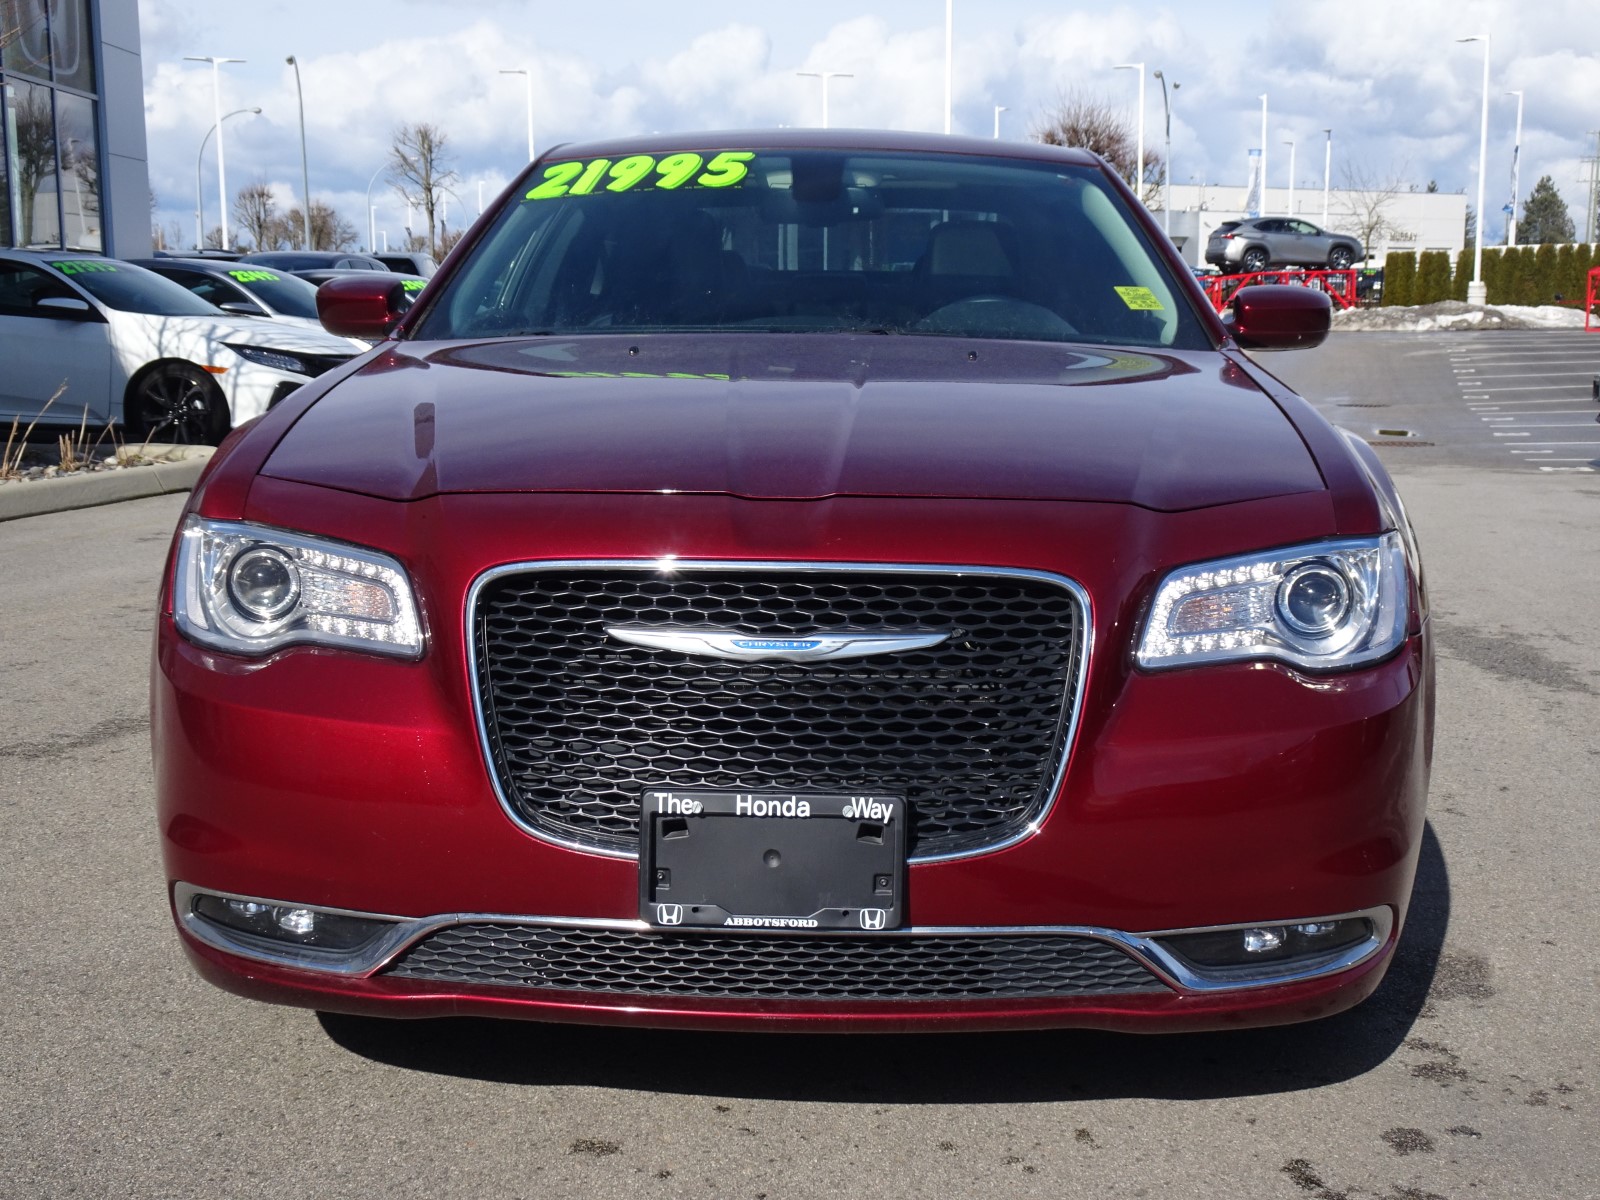 Used 2016 Chrysler 300 in Abbotsford,BC